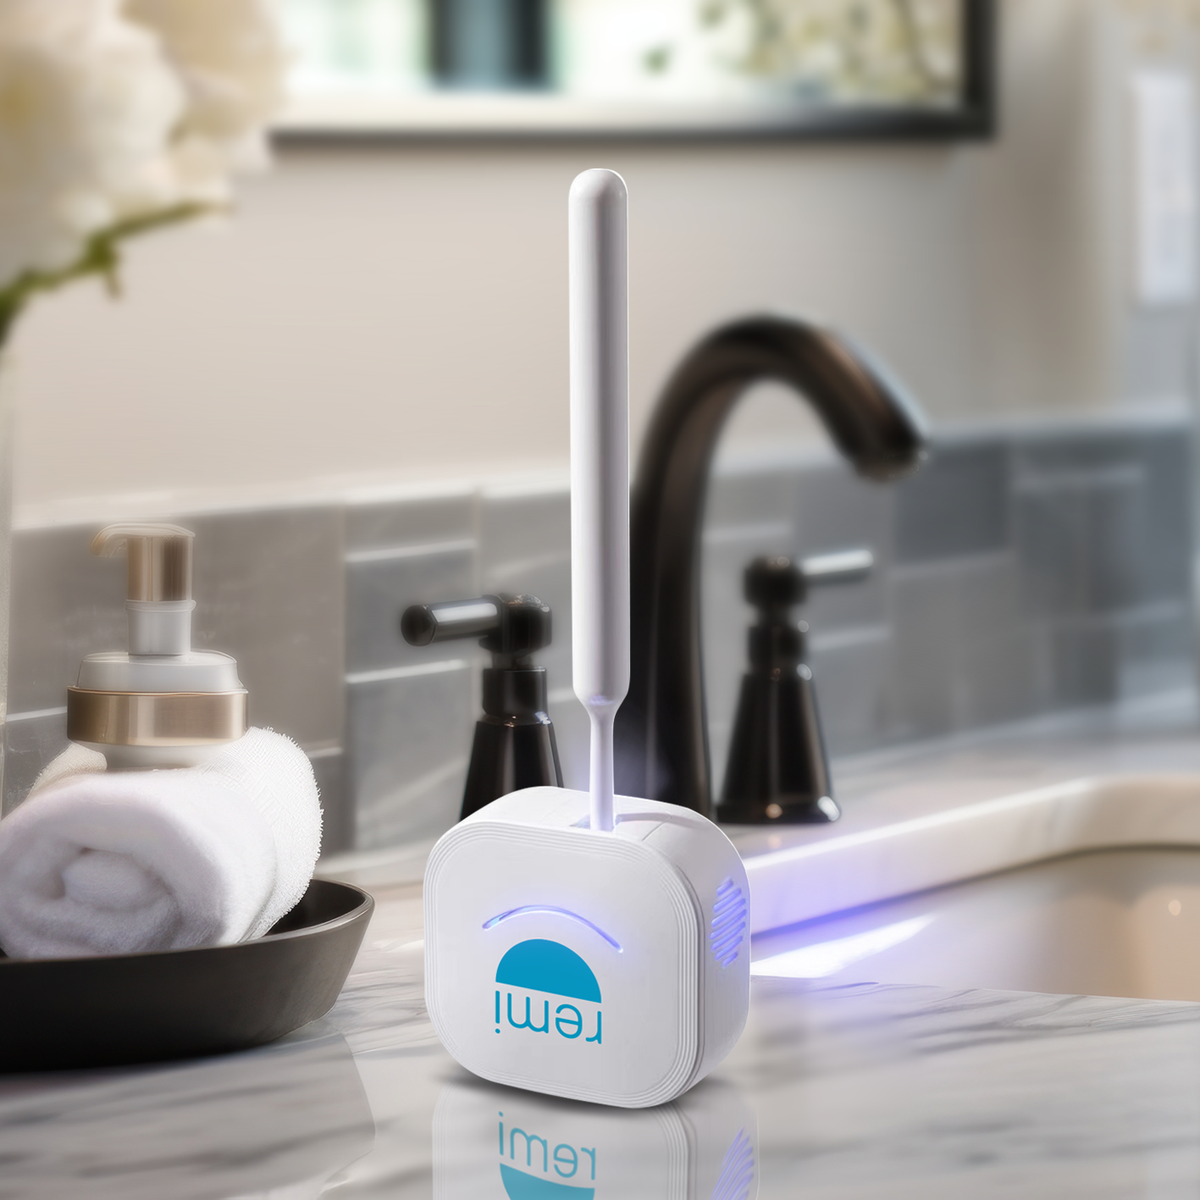 A modern Violight UV Toothbrush Sanitizer featuring a sleek design sits on a bathroom countertop illuminated by soft blue light, effectively killing bacteria.